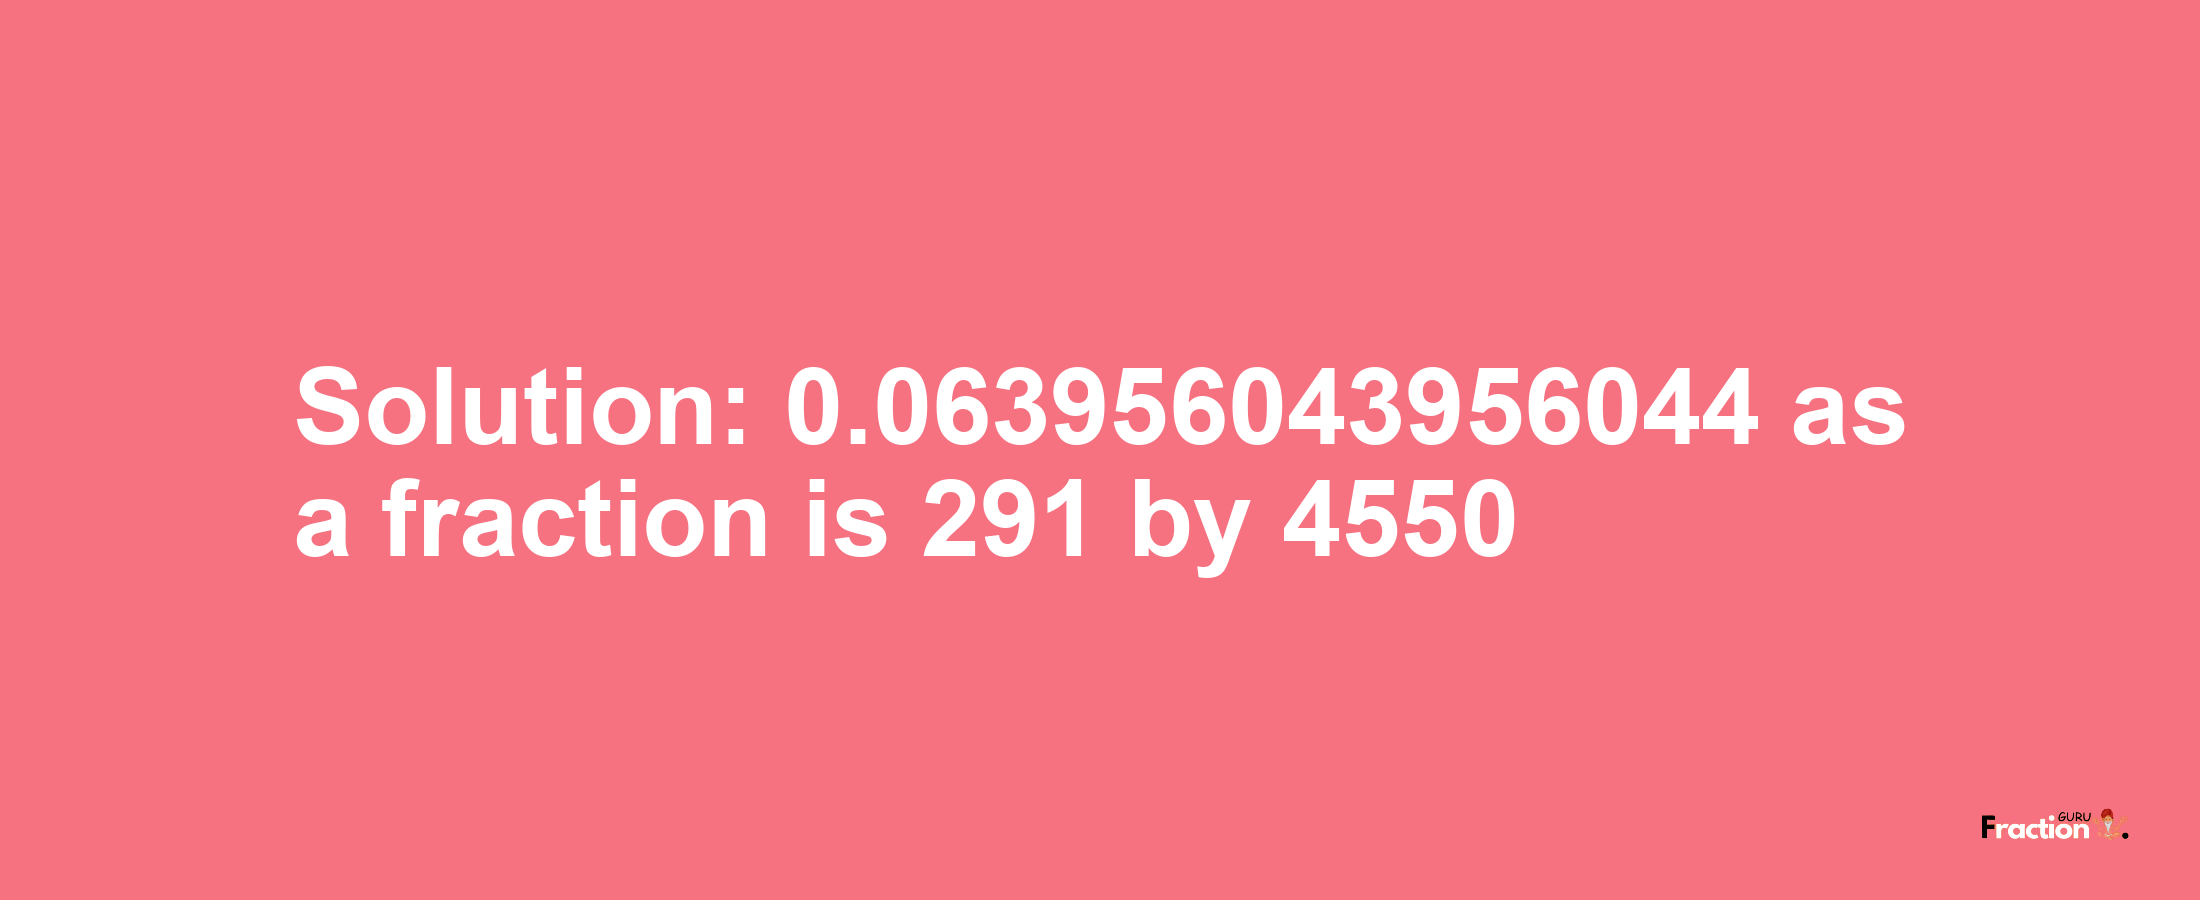 Solution:0.063956043956044 as a fraction is 291/4550